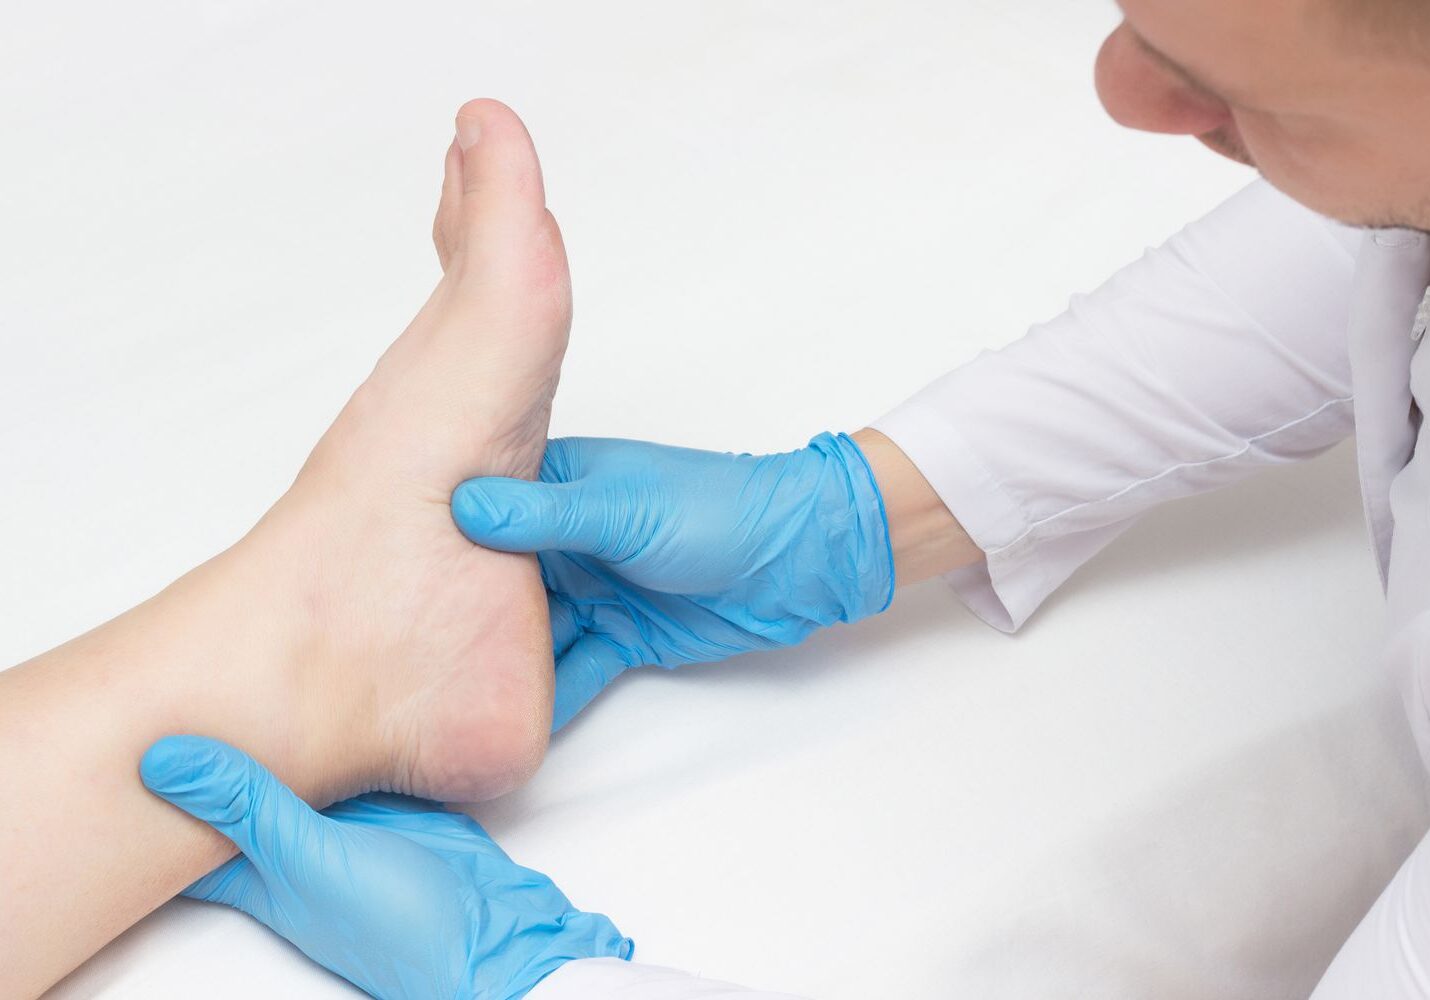 doctor-examines-the-patient-s-leg-with-heel-spurs--pain-in-the-foot--white-background--close-up--plantar-fasciitis-1174571272-cbdd17112bef4f67b022126ca117286c